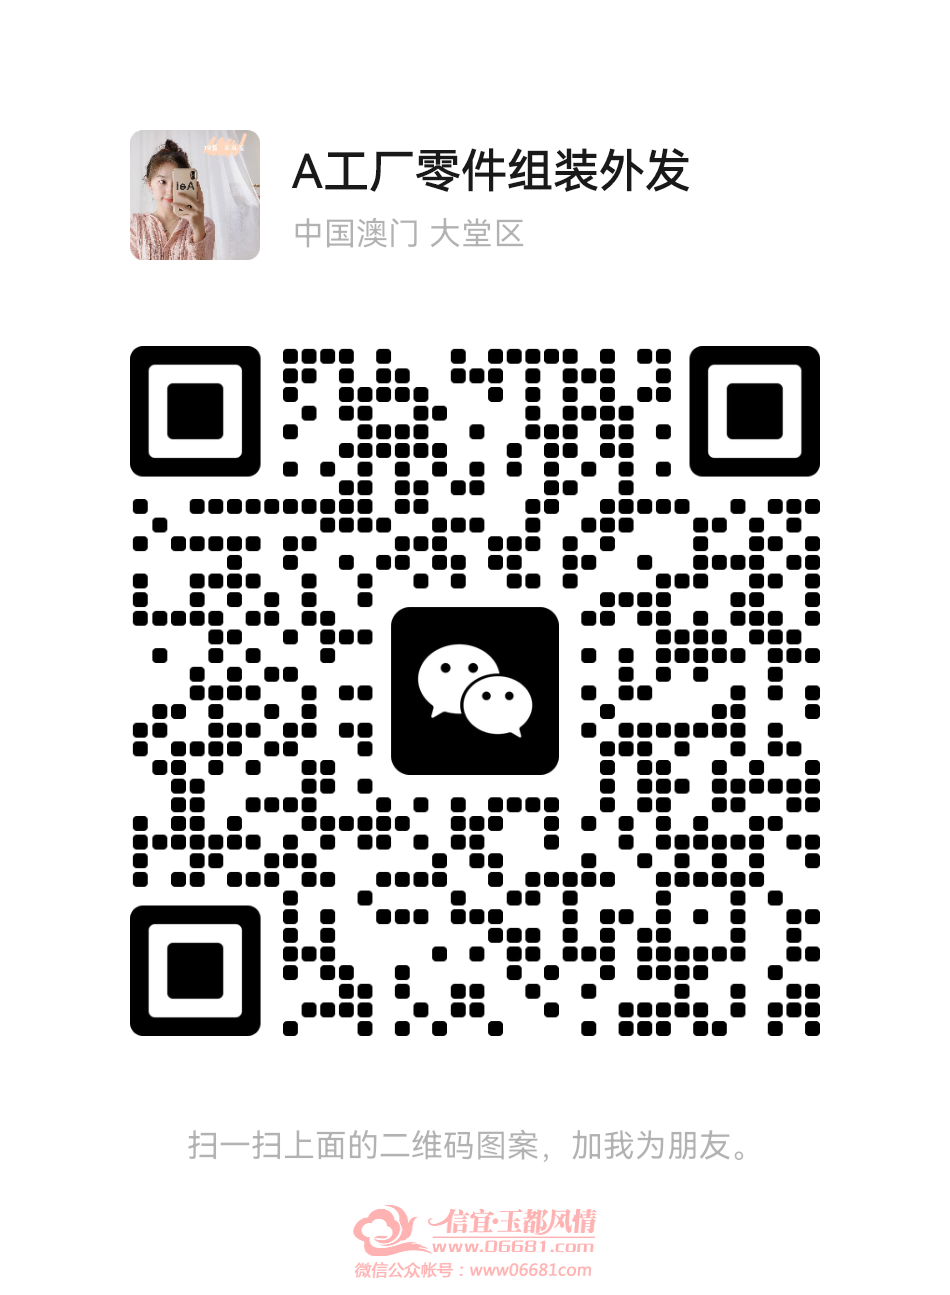 mmqrcode1665630271804.png